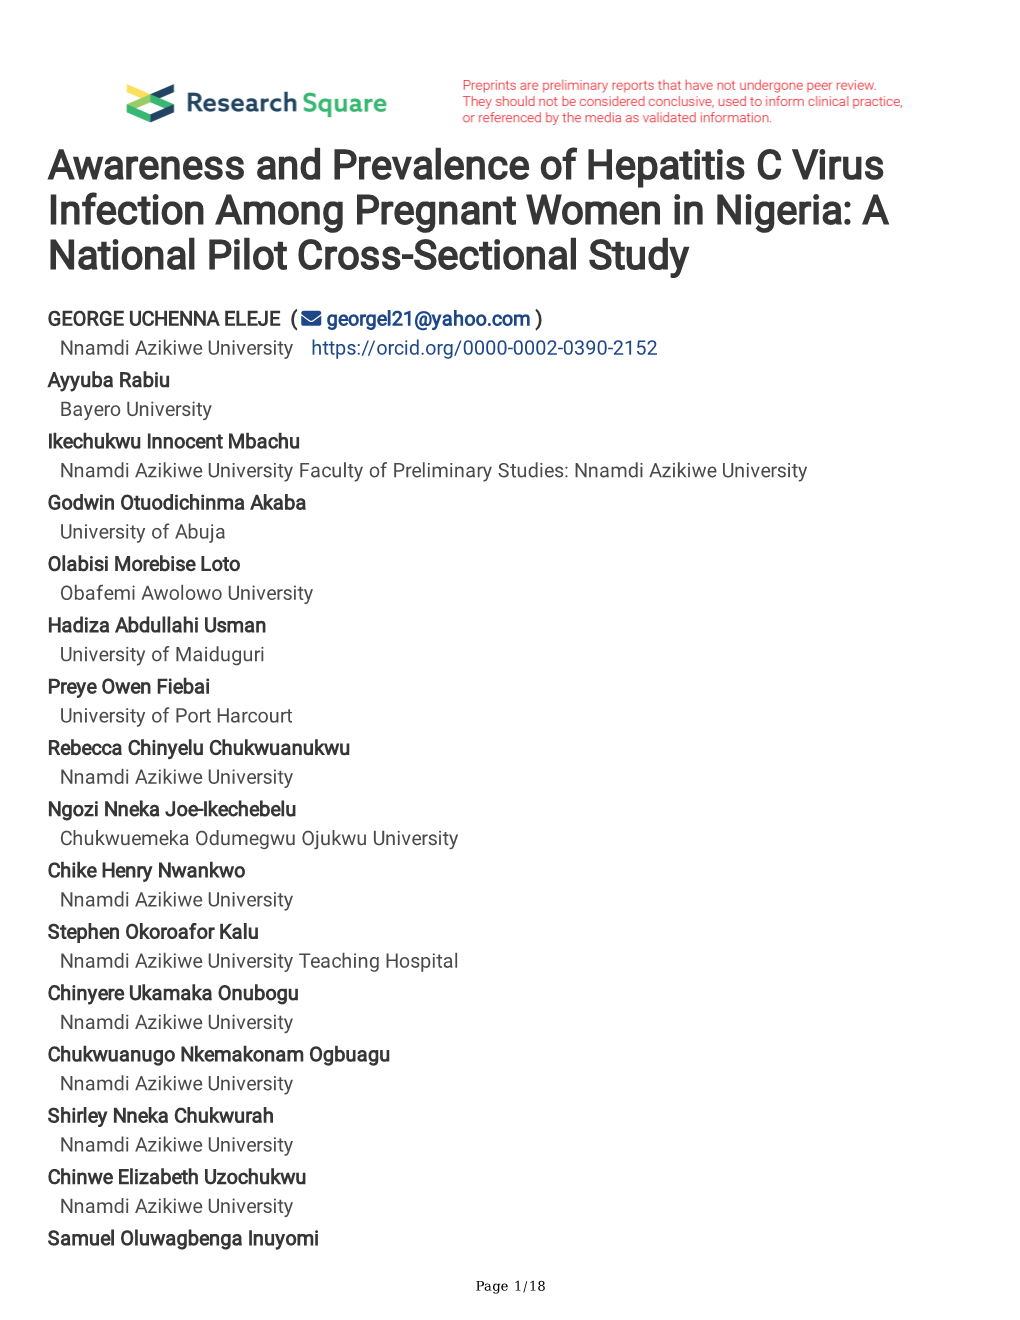 Awareness And Prevalence Of Hepatitis C Virus Infection Among Pregnant Women In Nigeria A